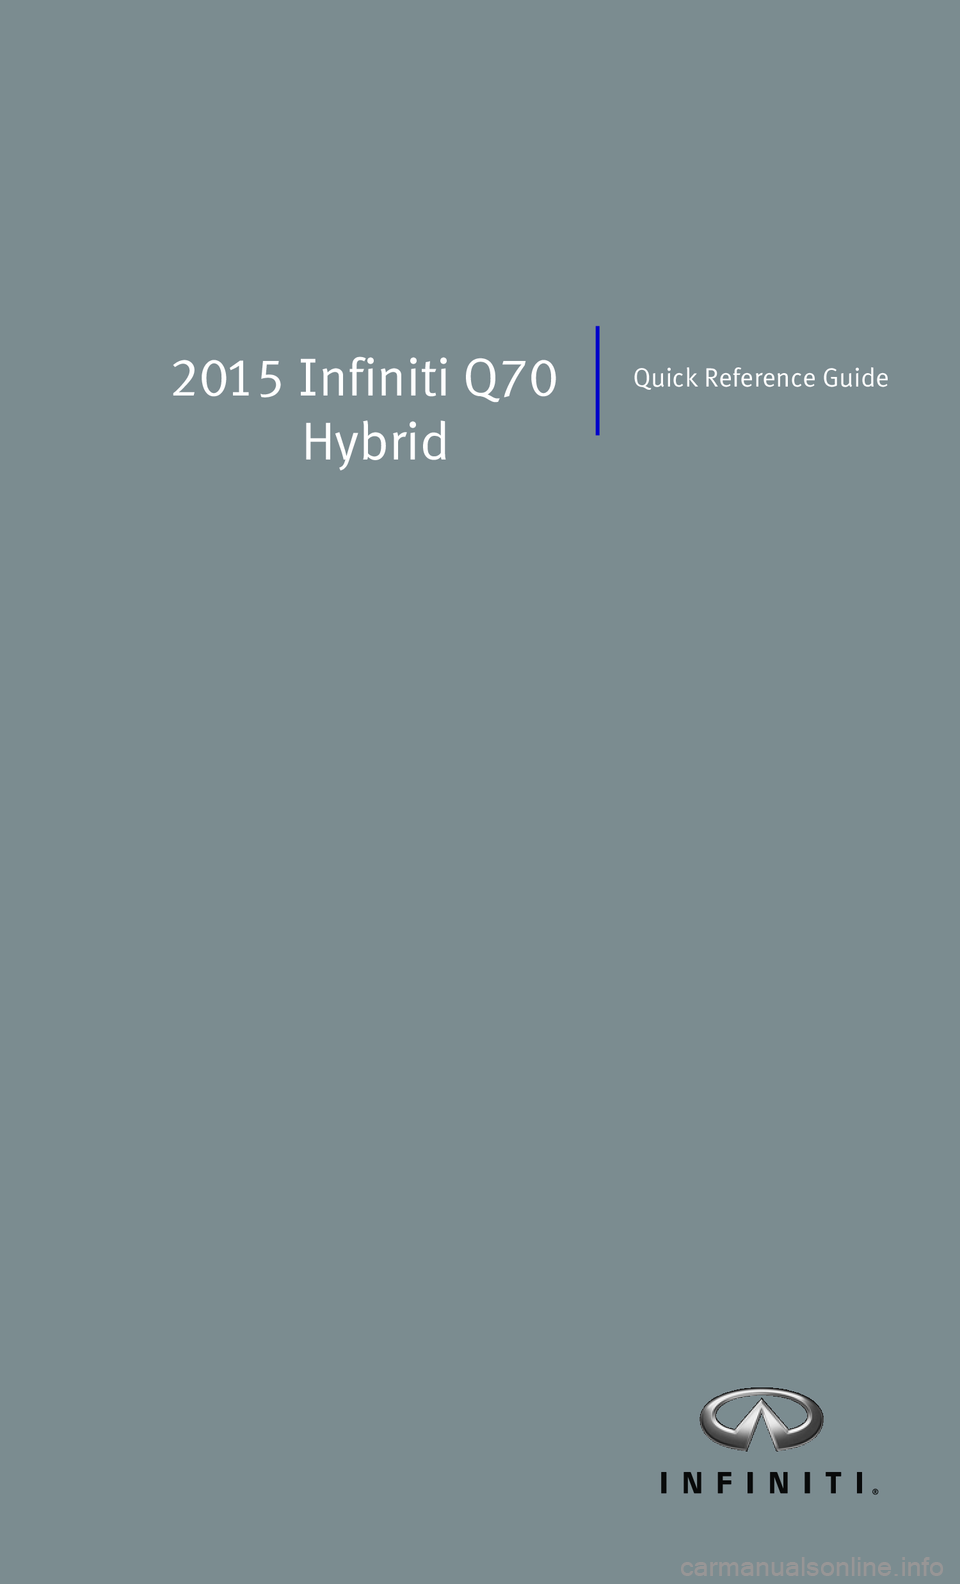 INFINITI Q70 HYBRID 2015  Quick Reference Guide 2015 Infiniti Q70
 Hybrid
Quick Reference Guide 